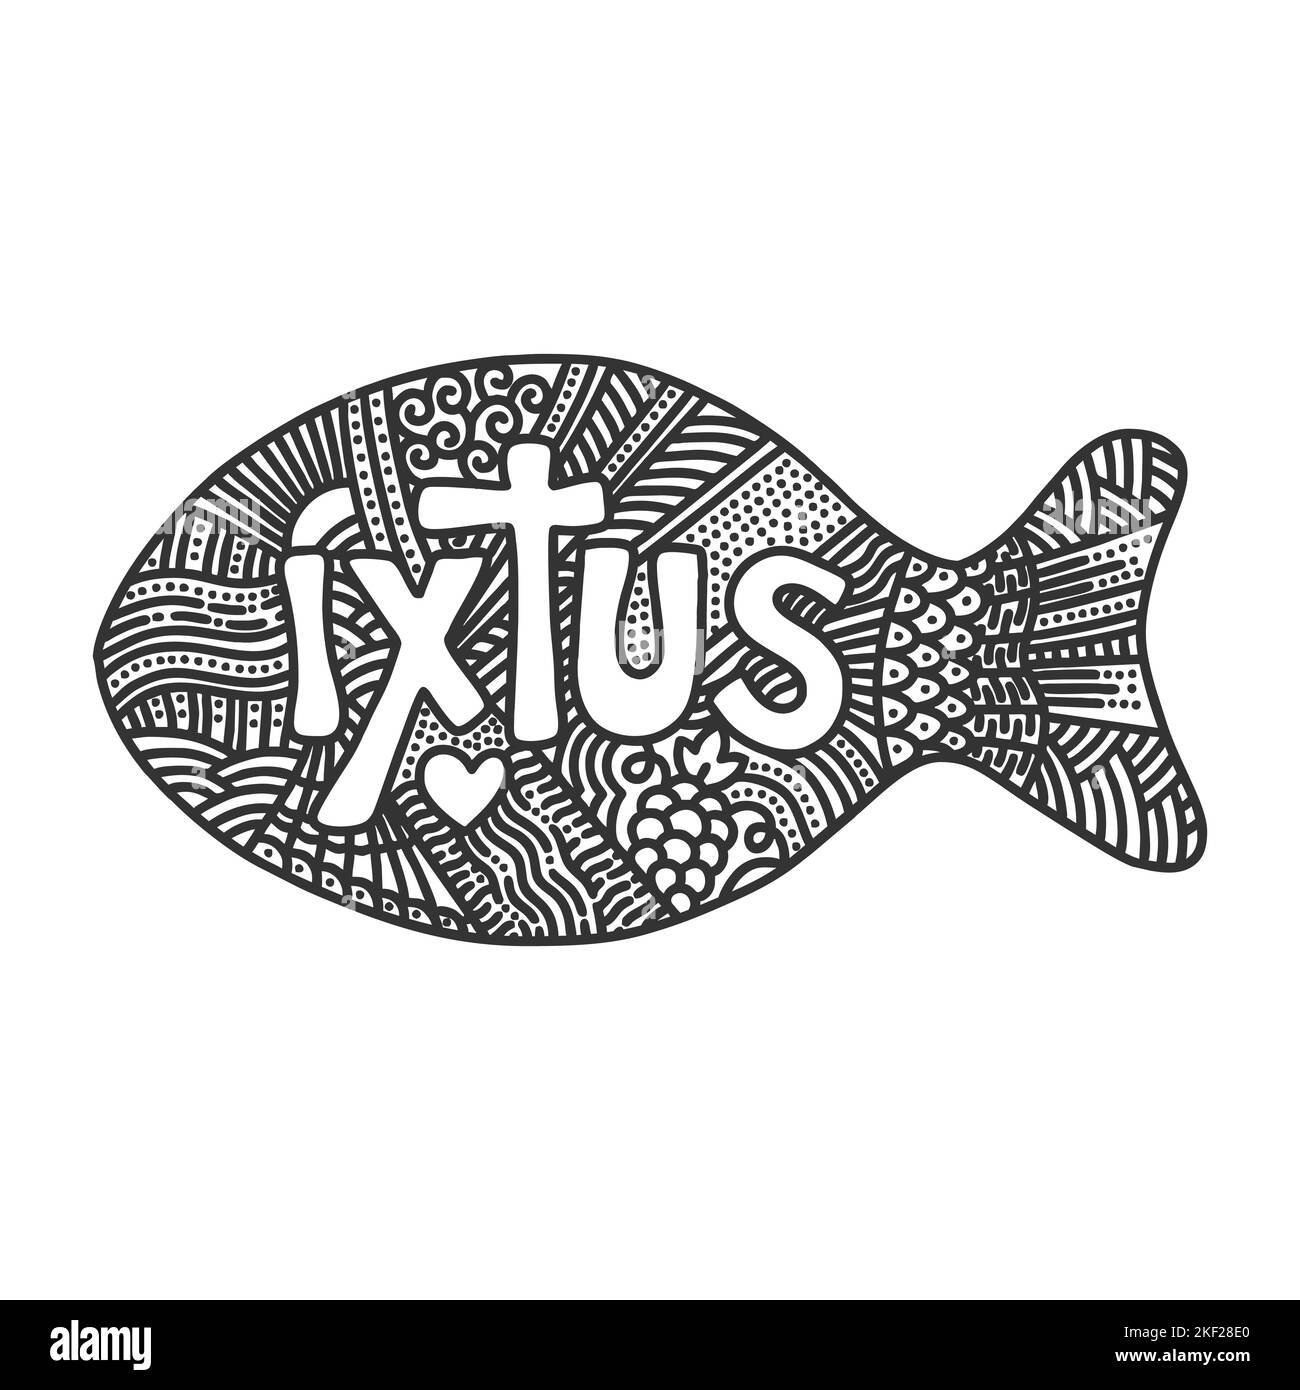 Christian illustration in a doodle style. Stylized word IXTUS - Jesus Christ, God's Son, Savior. The fish is an ancient Christian symbol. Stock Vector